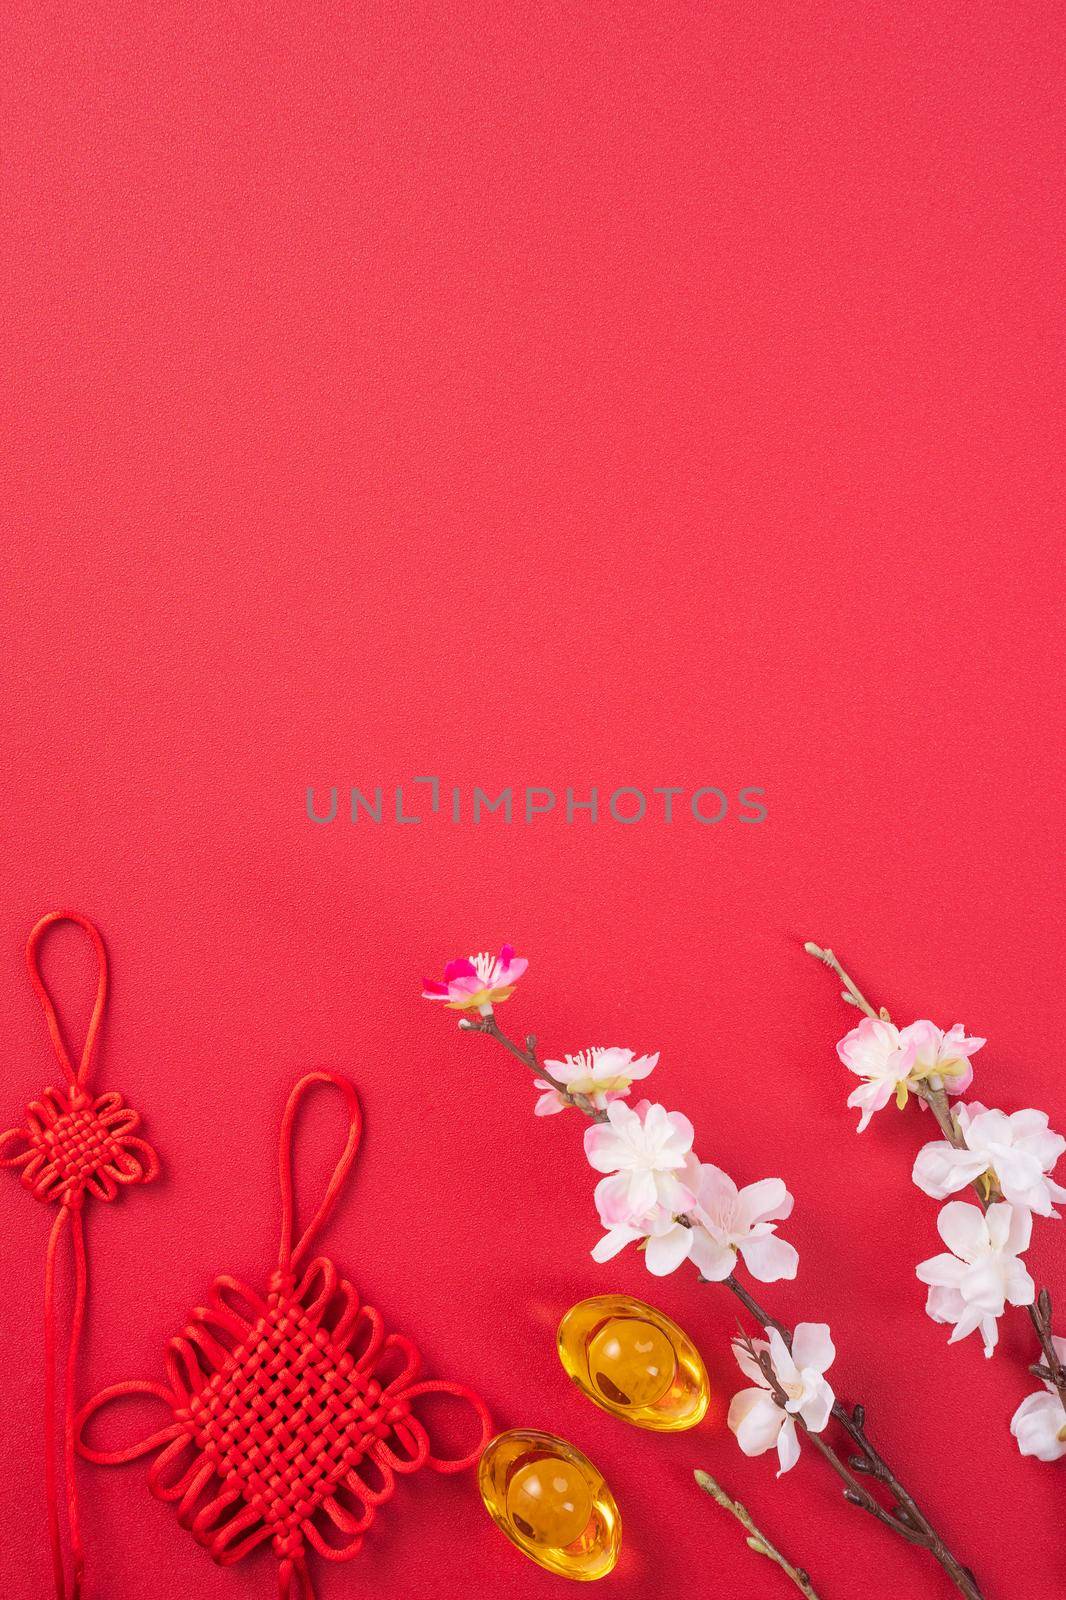 Design concept of Chinese lunar new year - Beautiful Chinese knot with plum blossom isolated on red background, flat lay, top view, overhead layout.